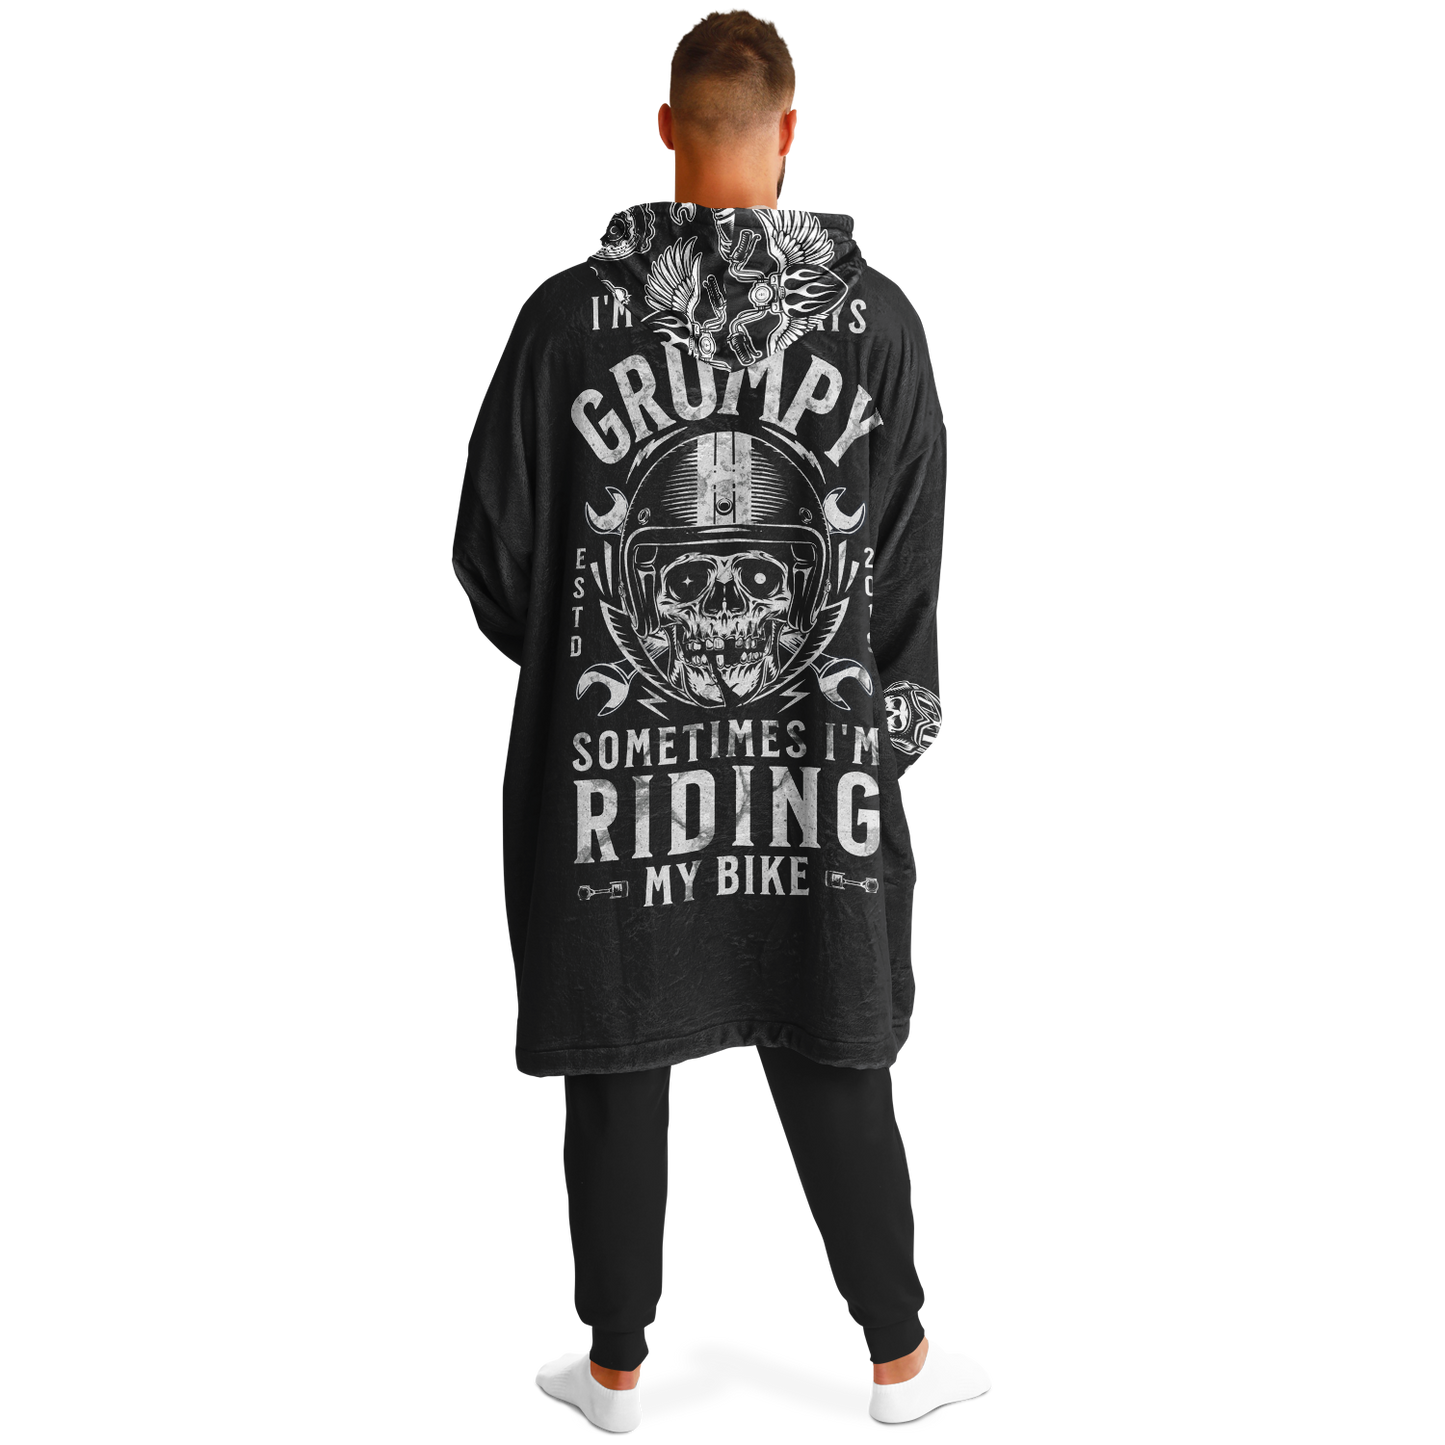 Grumpy Biker Super Hoodie - Available for a Strictly Limited Time ⏰